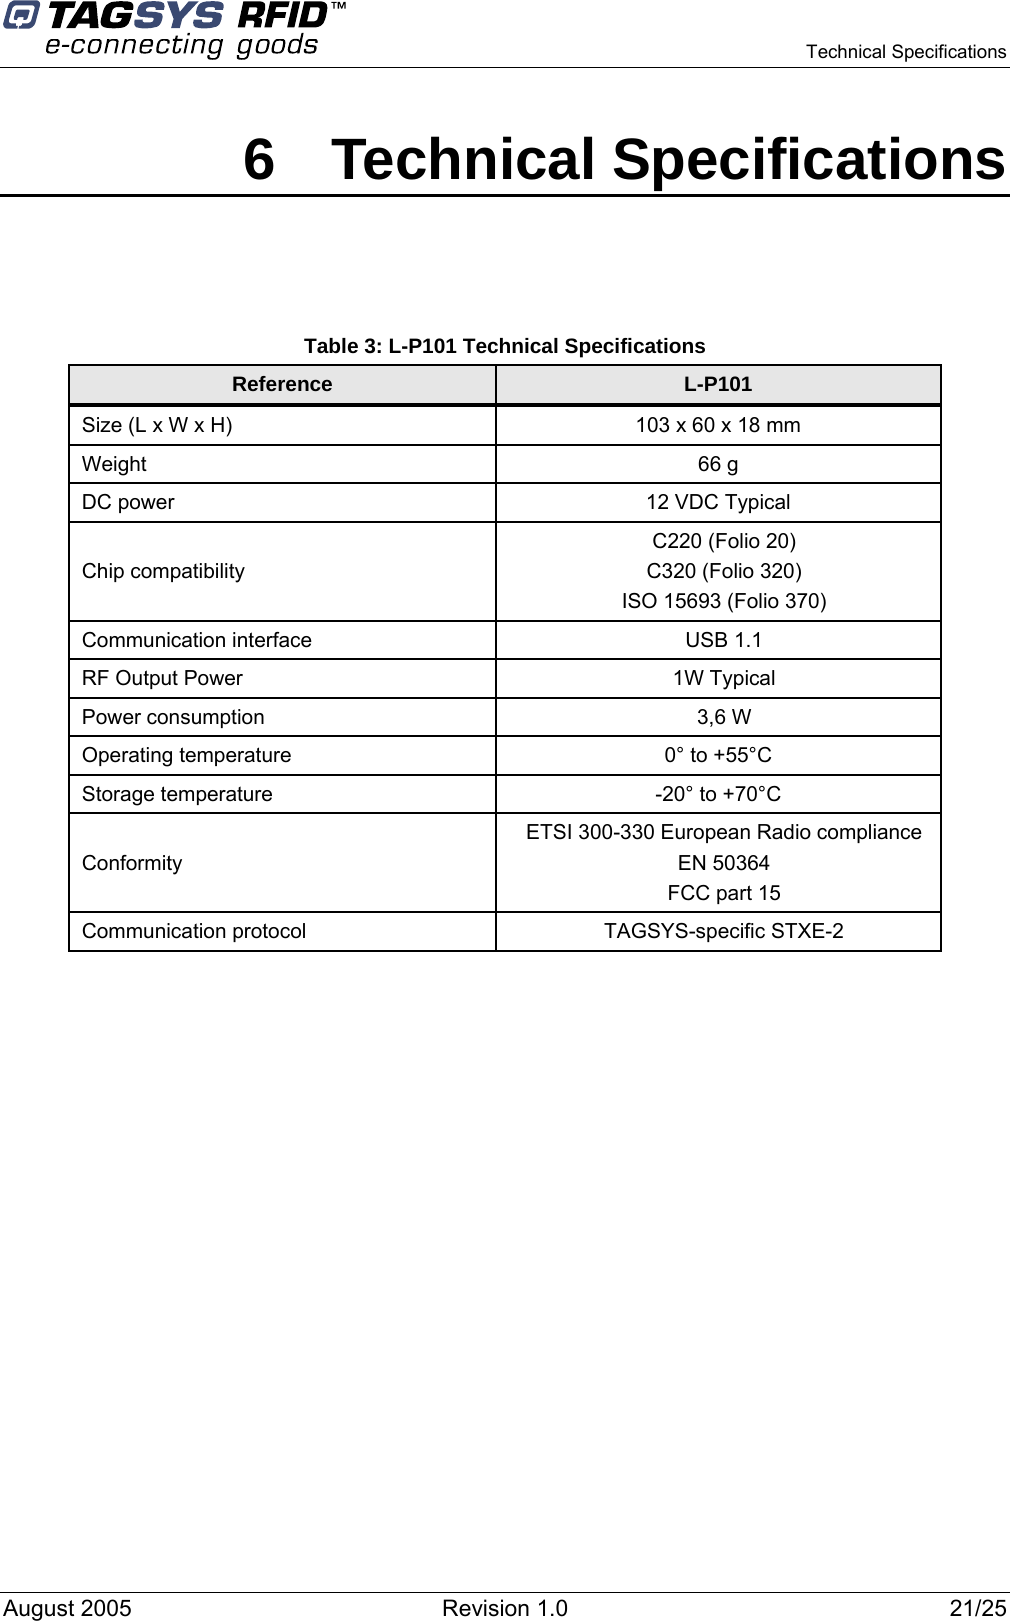    Technical Specifications    6 Technical Specifications   Table 3: L-P101 Technical Specifications Reference  L-P101 Size (L x W x H)  103 x 60 x 18 mm Weight 66 g DC power  12 VDC Typical Chip compatibility C220 (Folio 20) C320 (Folio 320) ISO 15693 (Folio 370) Communication interface  USB 1.1  RF Output Power  1W Typical Power consumption   3,6 W Operating temperature  0° to +55°C Storage temperature  -20° to +70°C Conformity ETSI 300-330 European Radio compliance EN 50364 FCC part 15 Communication protocol  TAGSYS-specific STXE-2   August 2005  Revision 1.0  21/25   